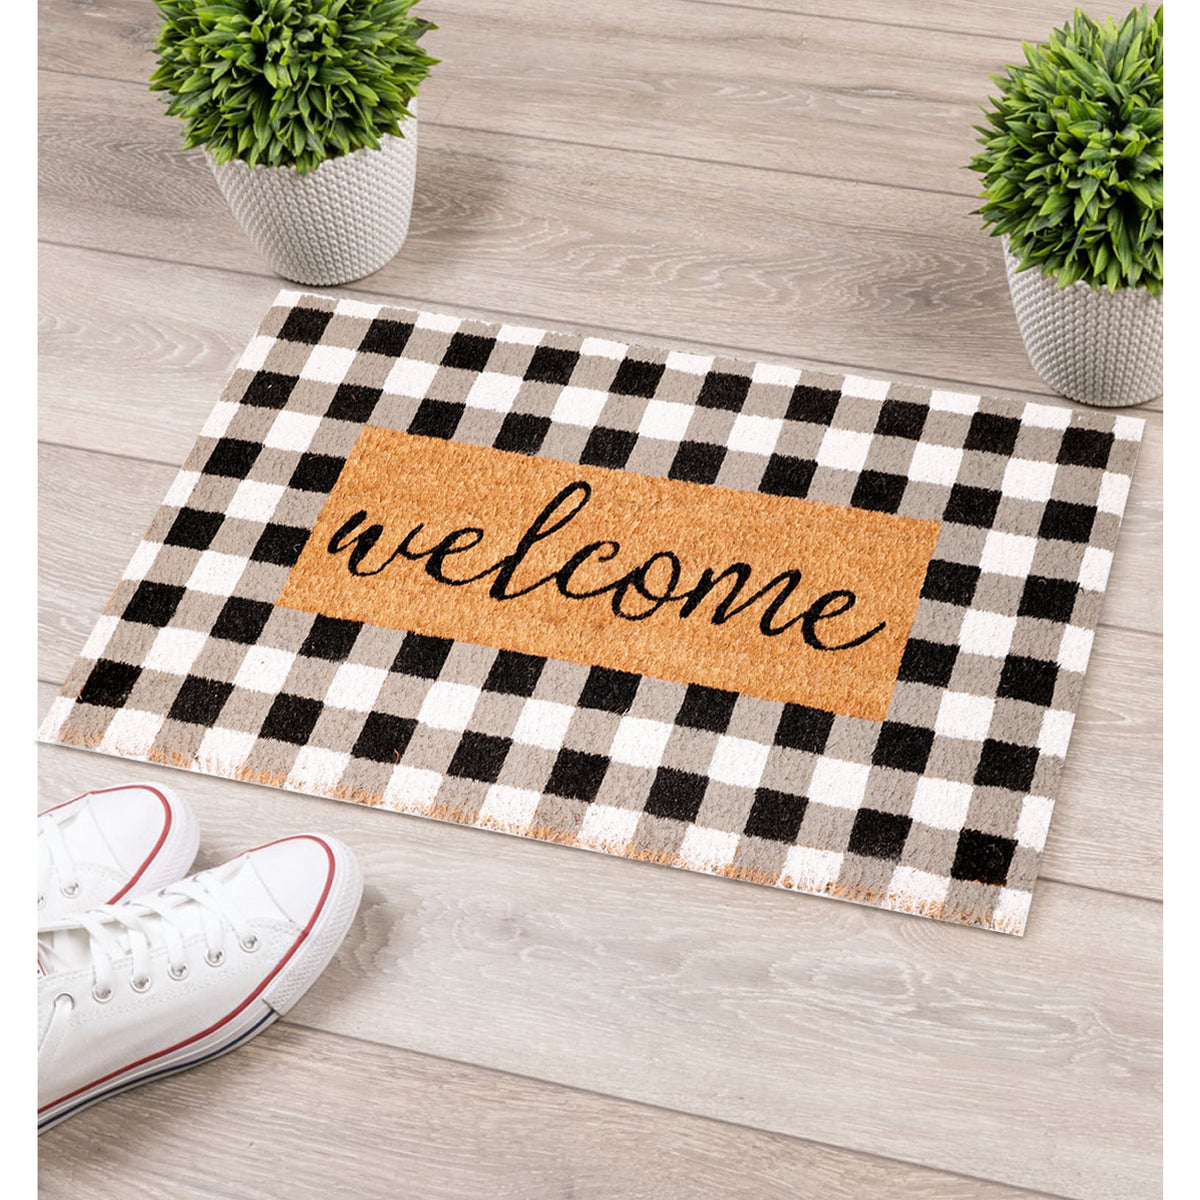 OnlyMat Chequered Plaid Border Printed Natural Coir Welcome Entrance Door Mat